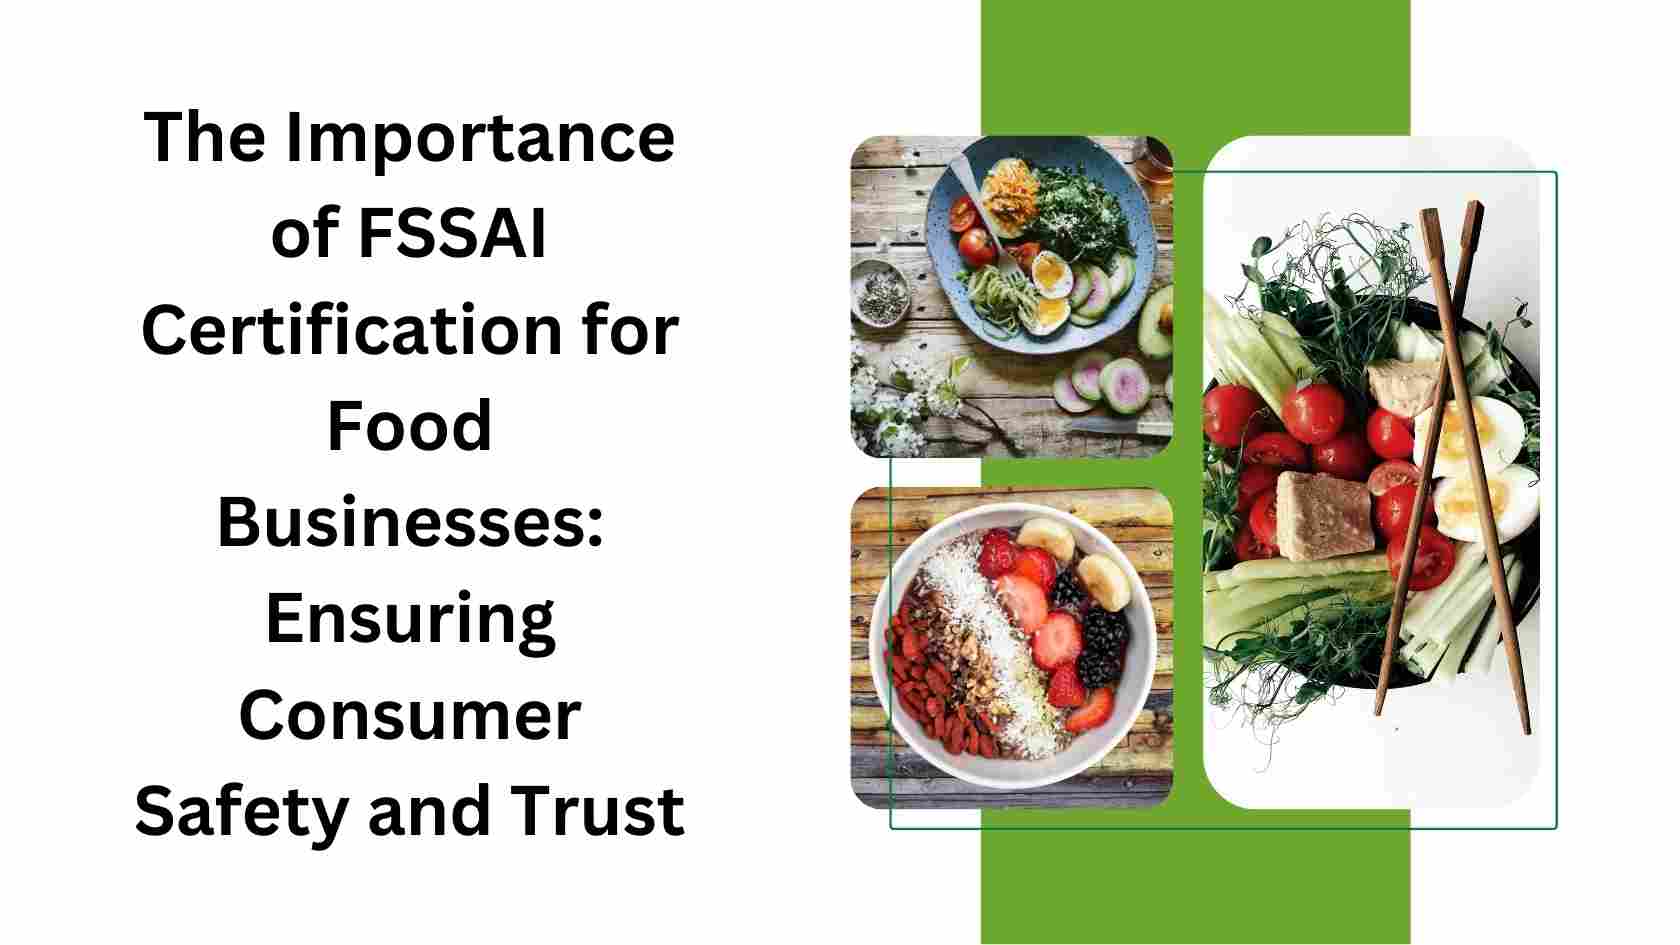 The Importance of FSSAI Certification for Food Businesses Ensuring Consumer Safety and Trust